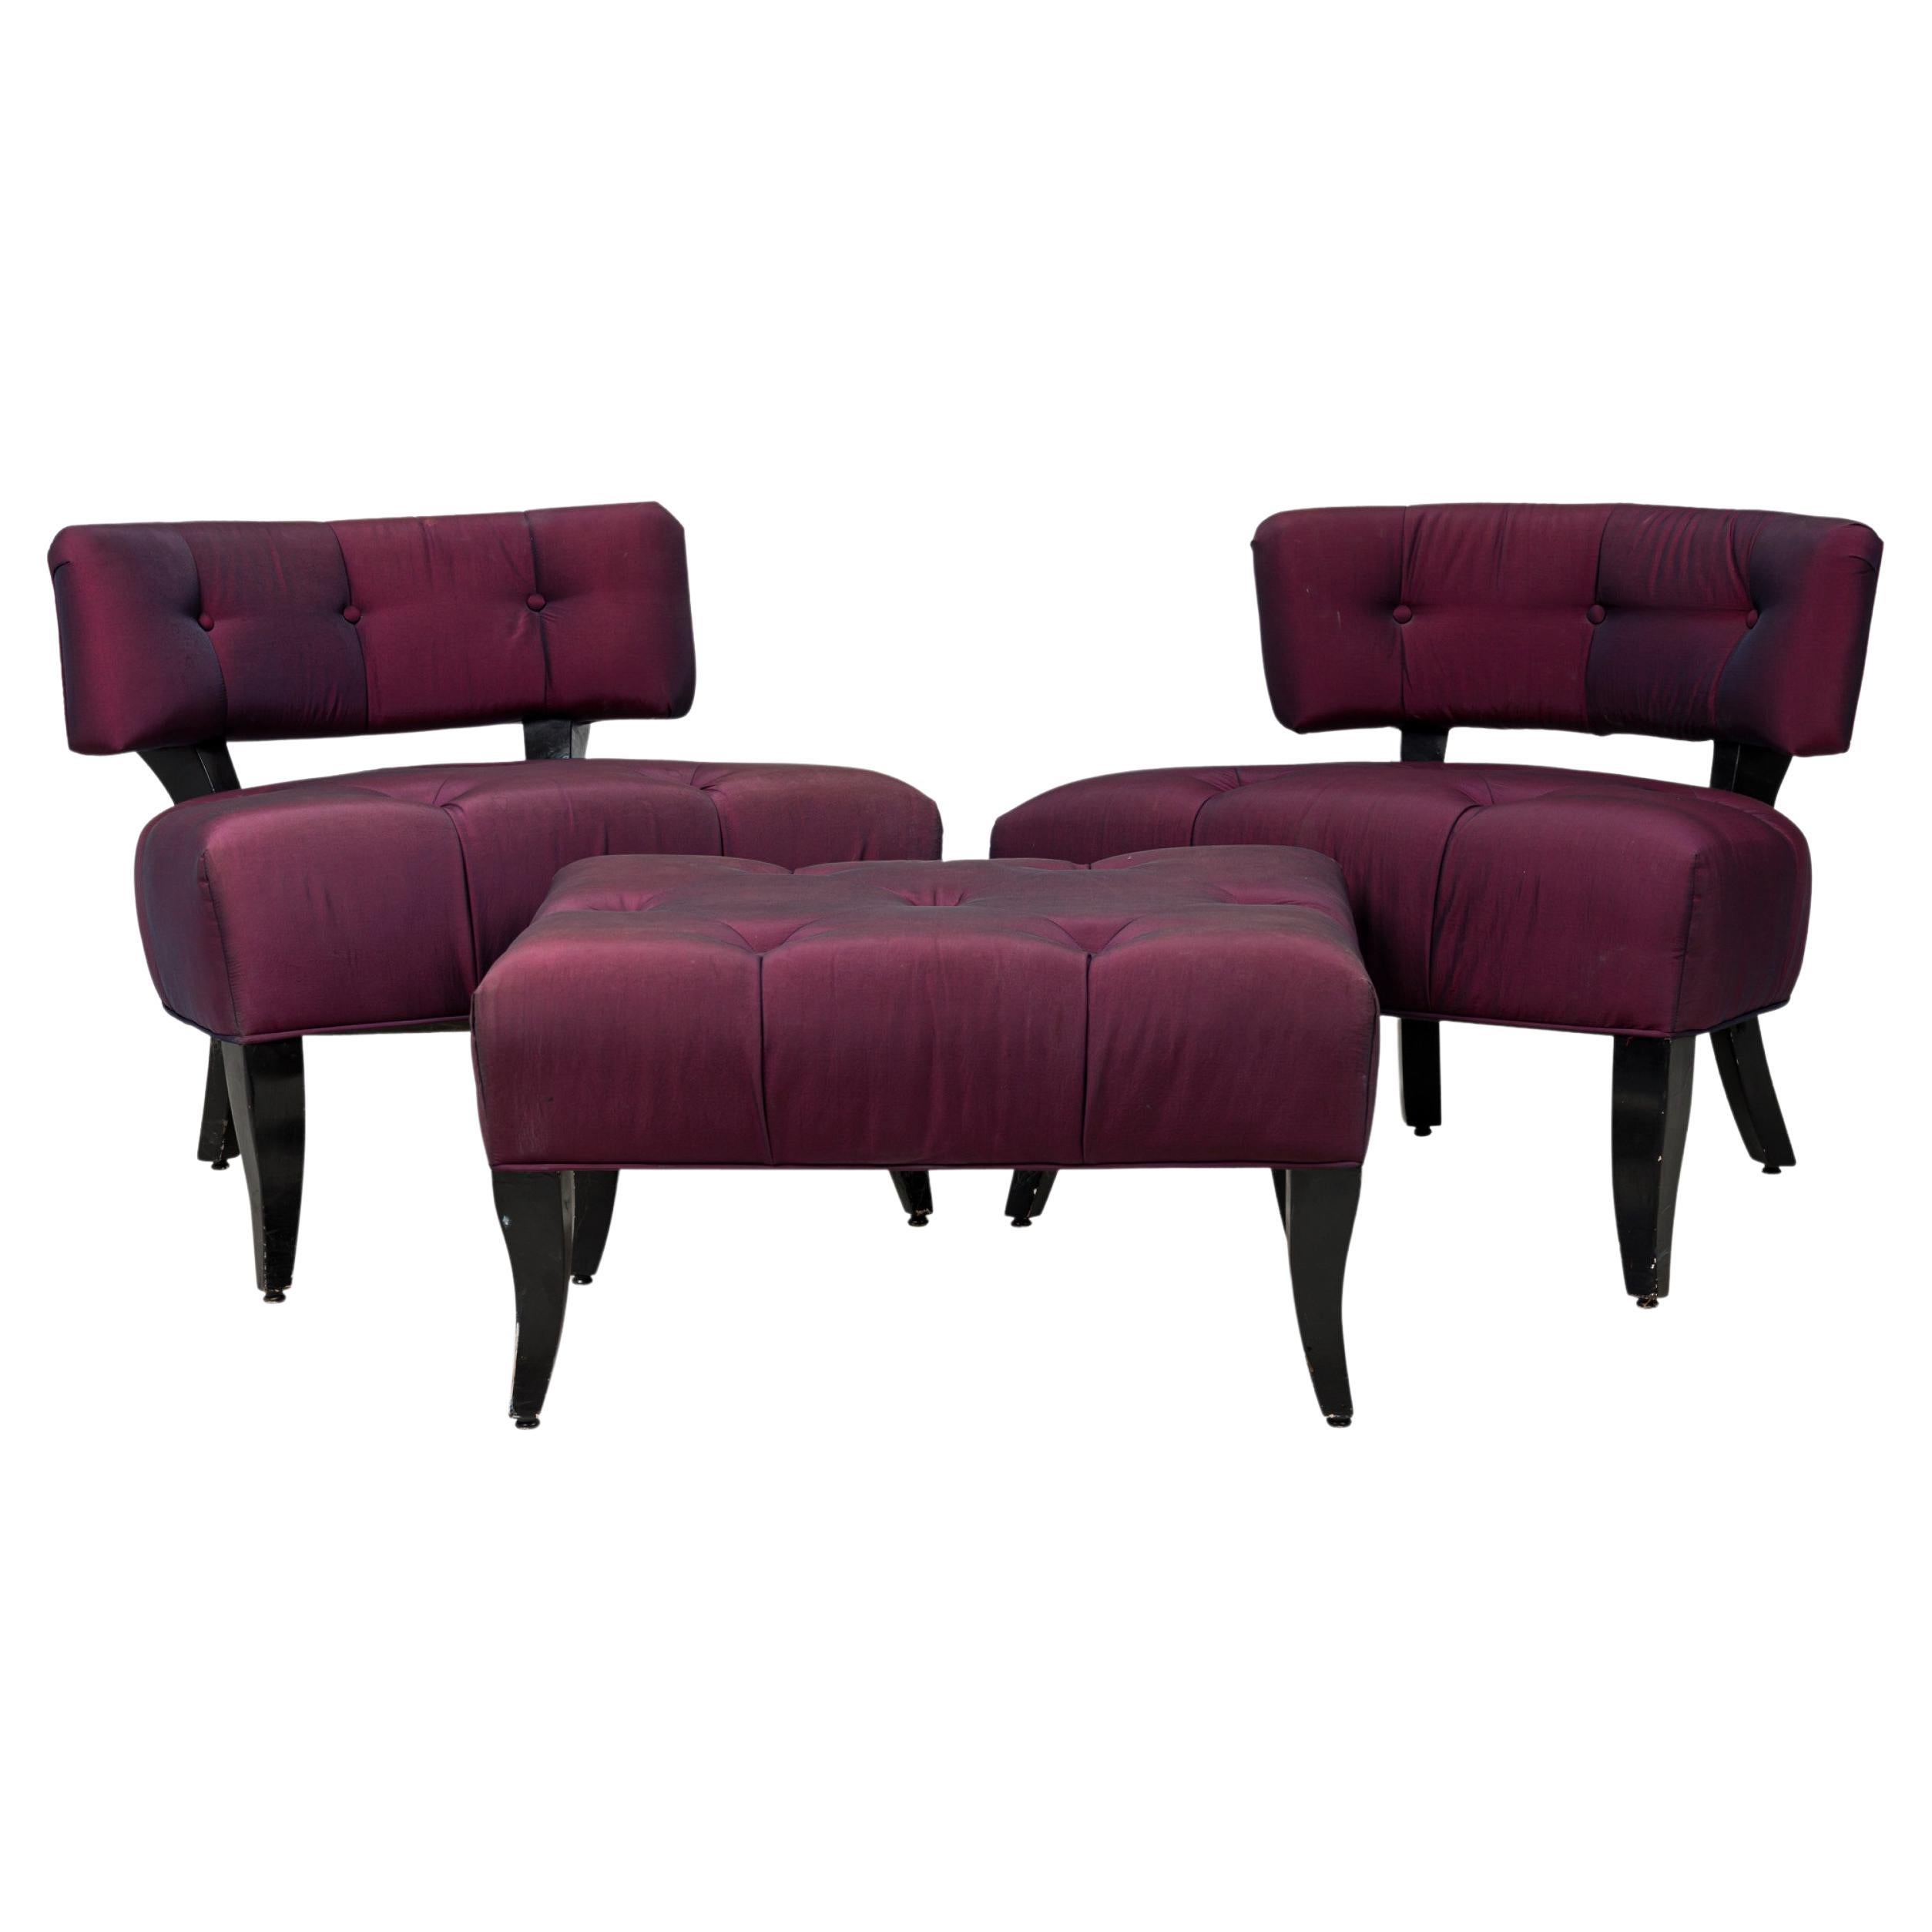 Pair of Billy Haines American Purple Upholstered Slipper Chairs & Ottoman